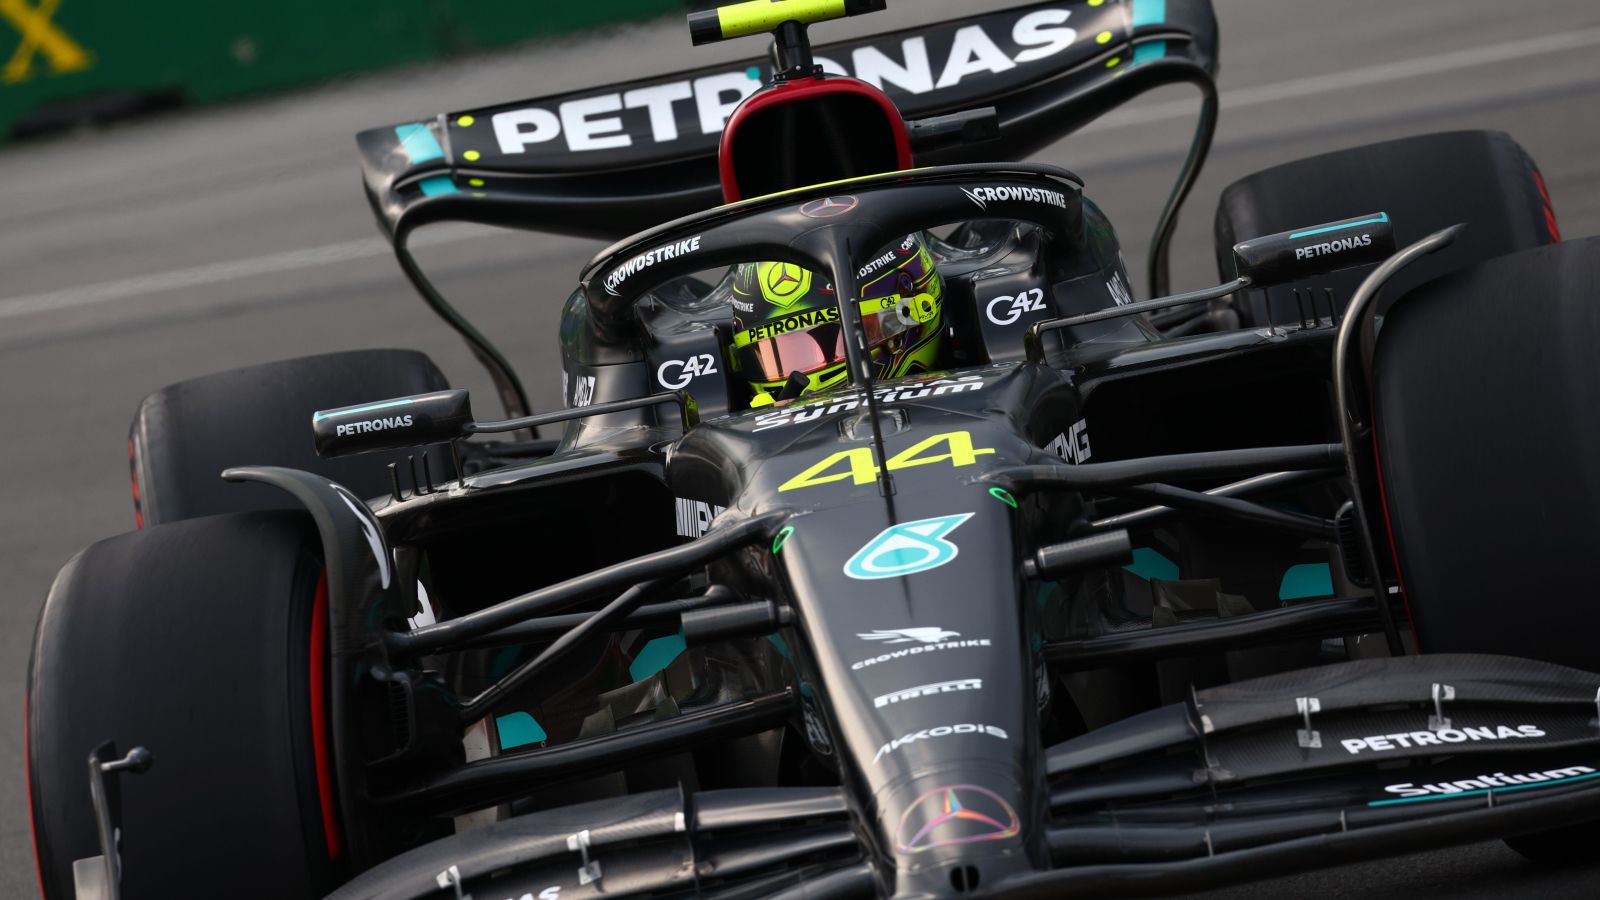 Mercedes four-race timeline could concern Red Bull in quest for F1 greatness PlanetF1